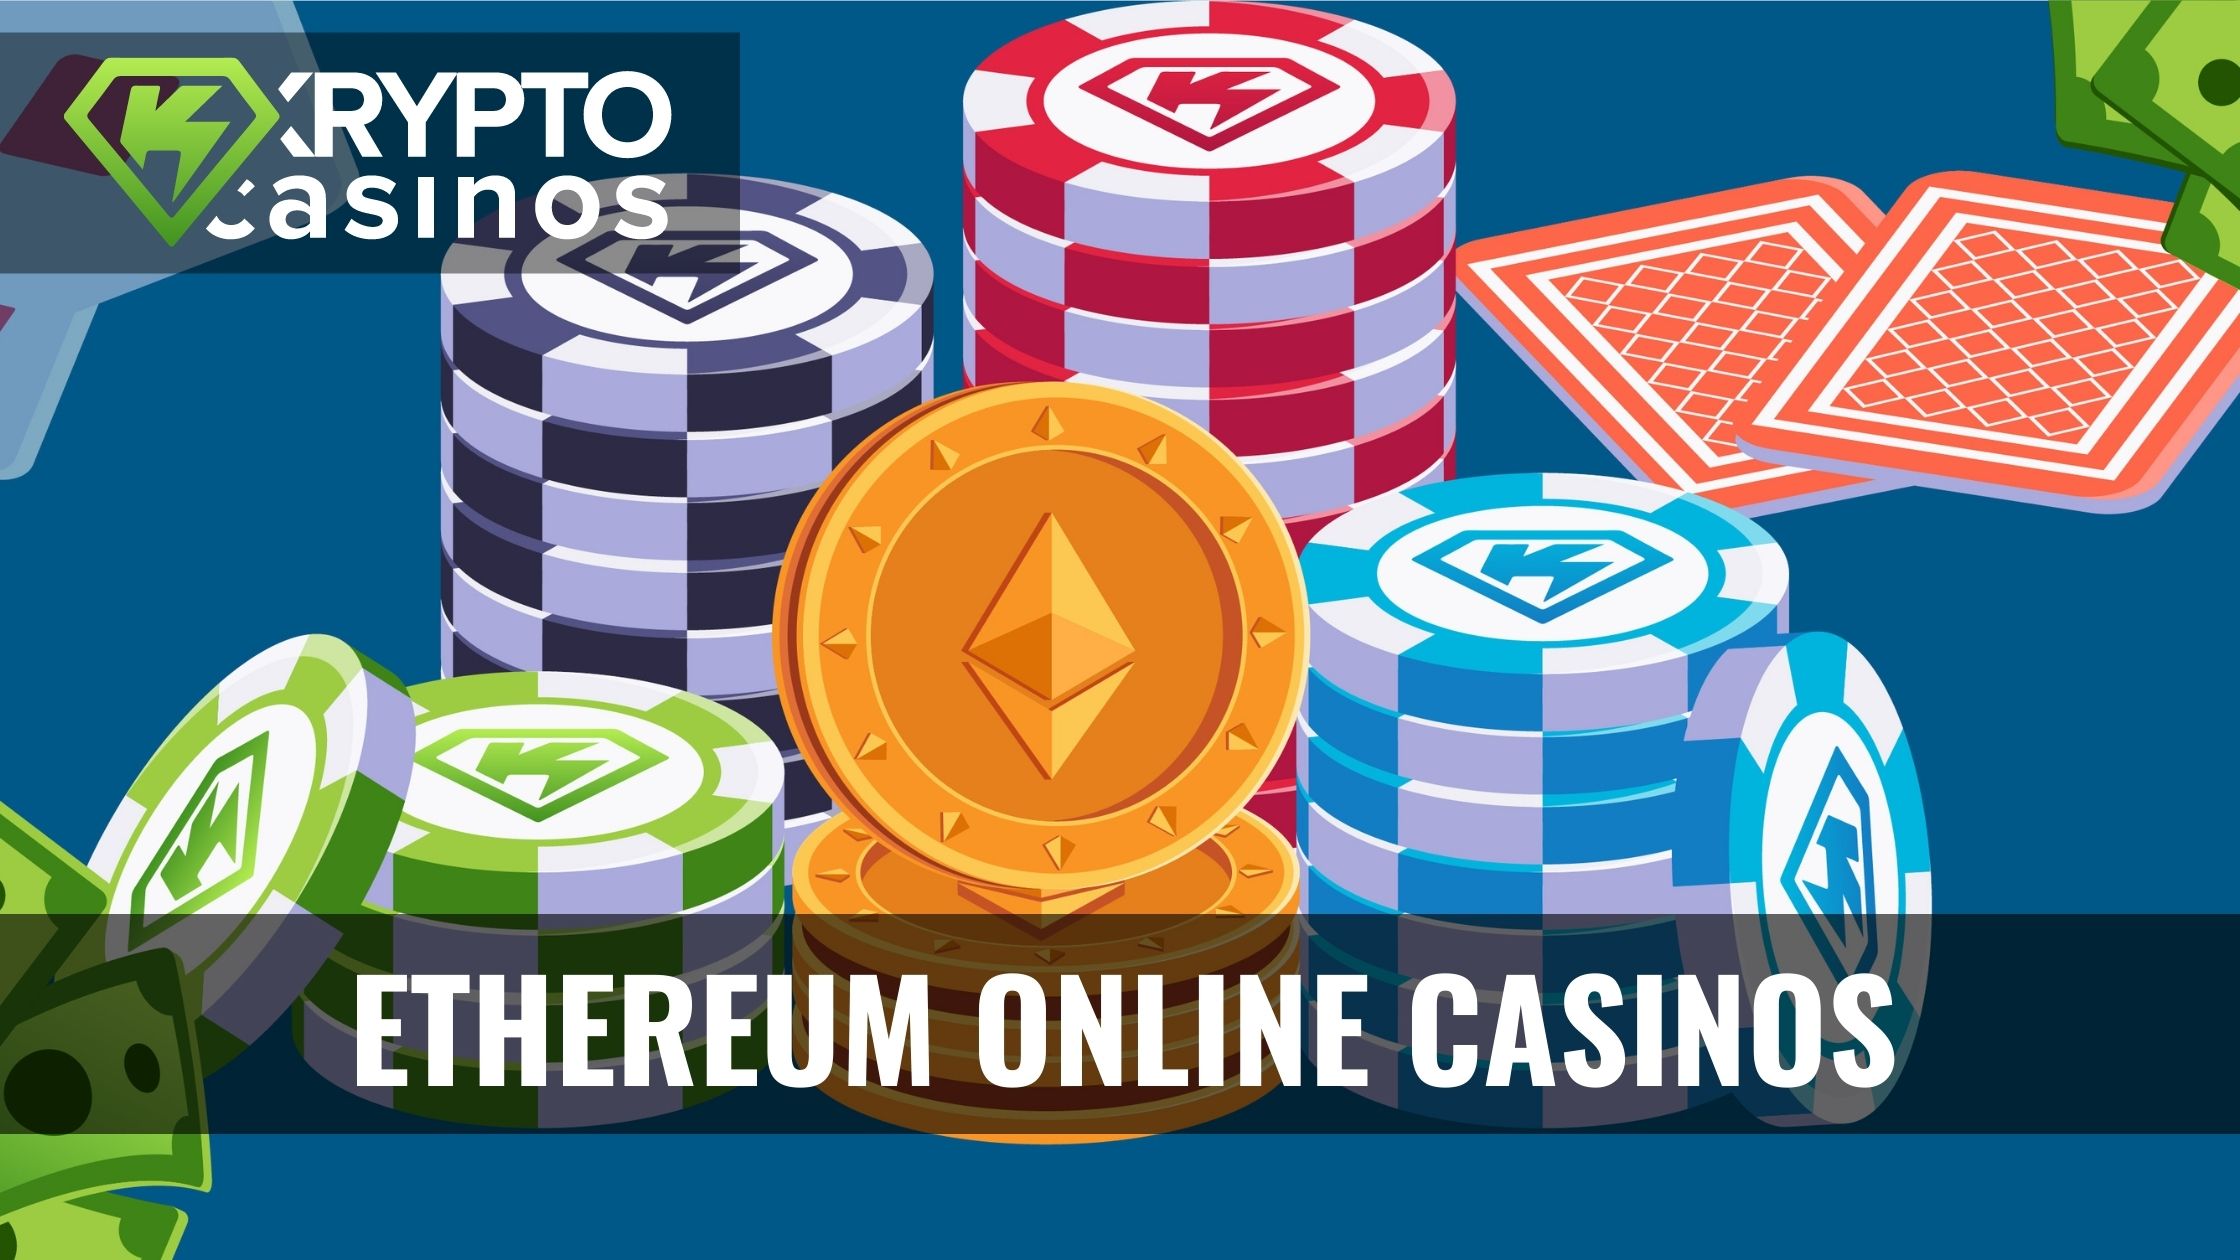 What Do You Want Ethereum Online Casinos To Become?